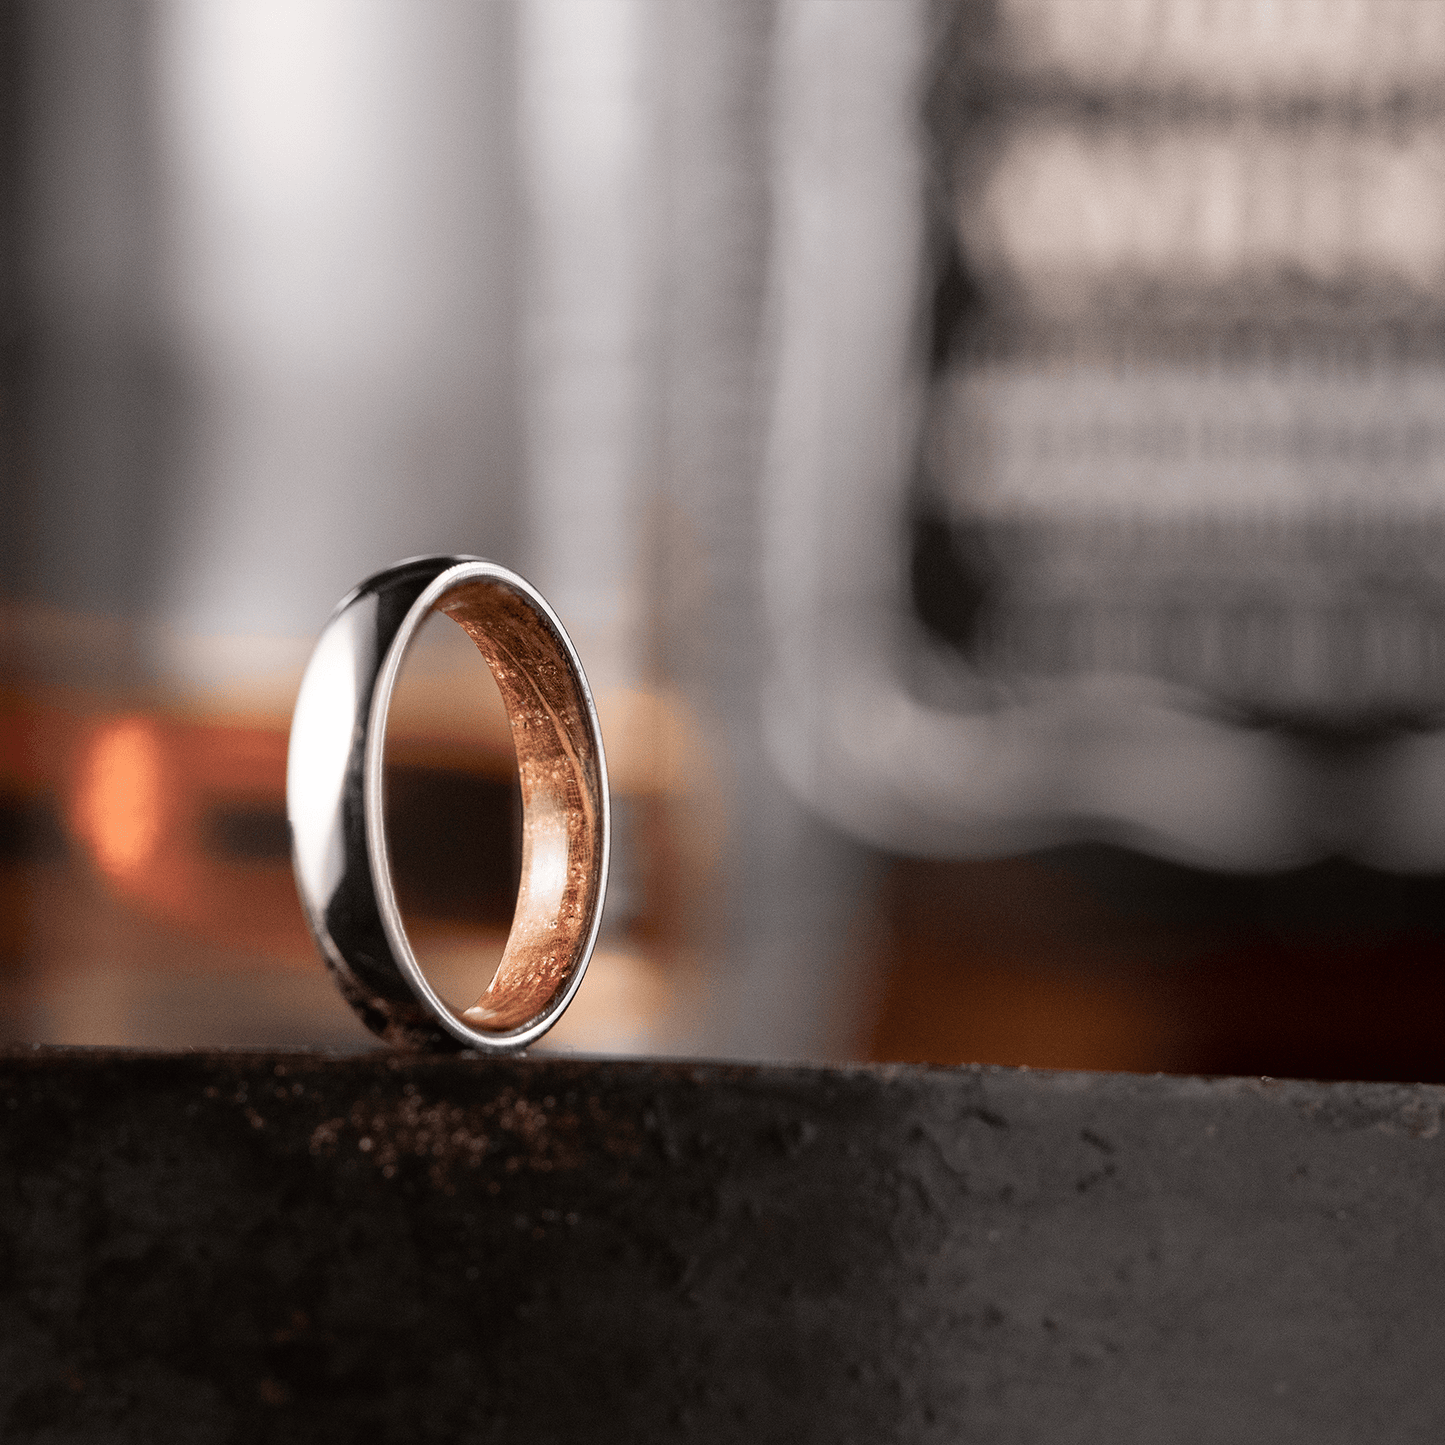 The Cady - Men's Wedding Rings - Manly Bands